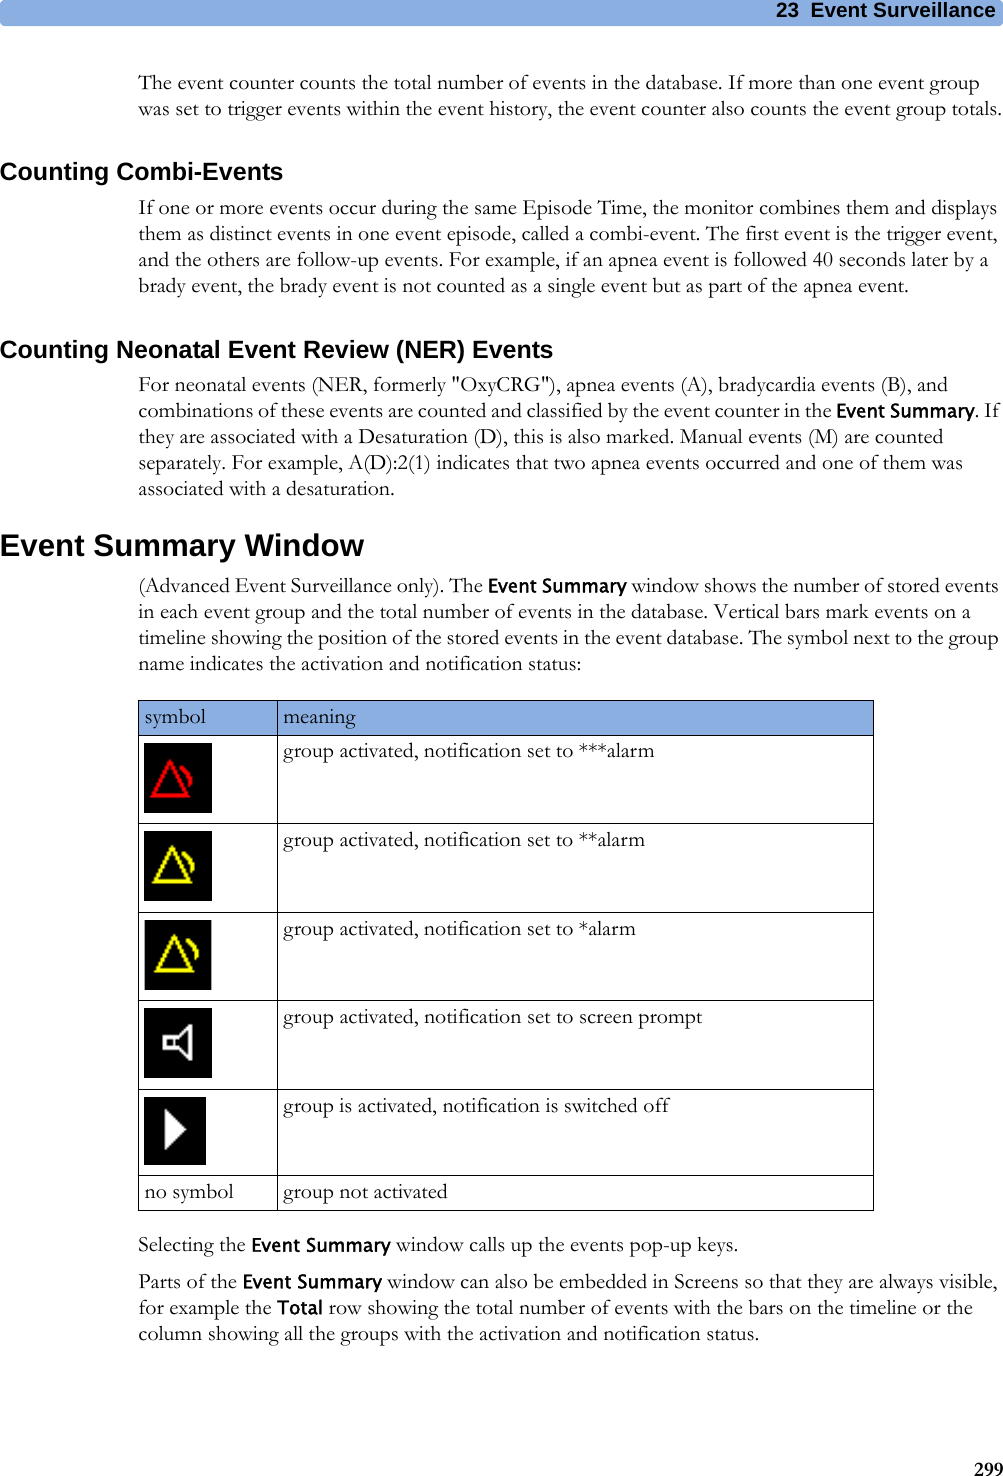 23 Event Surveillance299The event counter counts the total number of events in the database. If more than one event group was set to trigger events within the event history, the event counter also counts the event group totals.Counting Combi-EventsIf one or more events occur during the same Episode Time, the monitor combines them and displays them as distinct events in one event episode, called a combi-event. The first event is the trigger event, and the others are follow-up events. For example, if an apnea event is followed 40 seconds later by a brady event, the brady event is not counted as a single event but as part of the apnea event.Counting Neonatal Event Review (NER) EventsFor neonatal events (NER, formerly &quot;OxyCRG&quot;), apnea events (A), bradycardia events (B), and combinations of these events are counted and classified by the event counter in the Event Summary. If they are associated with a Desaturation (D), this is also marked. Manual events (M) are counted separately. For example, A(D):2(1) indicates that two apnea events occurred and one of them was associated with a desaturation.Event Summary Window(Advanced Event Surveillance only). The Event Summary window shows the number of stored events in each event group and the total number of events in the database. Vertical bars mark events on a timeline showing the position of the stored events in the event database. The symbol next to the group name indicates the activation and notification status:Selecting the Event Summary window calls up the events pop-up keys.Parts of the Event Summary window can also be embedded in Screens so that they are always visible, for example the Total row showing the total number of events with the bars on the timeline or the column showing all the groups with the activation and notification status.symbol meaninggroup activated, notification set to ***alarmgroup activated, notification set to **alarmgroup activated, notification set to *alarmgroup activated, notification set to screen promptgroup is activated, notification is switched offno symbol group not activated